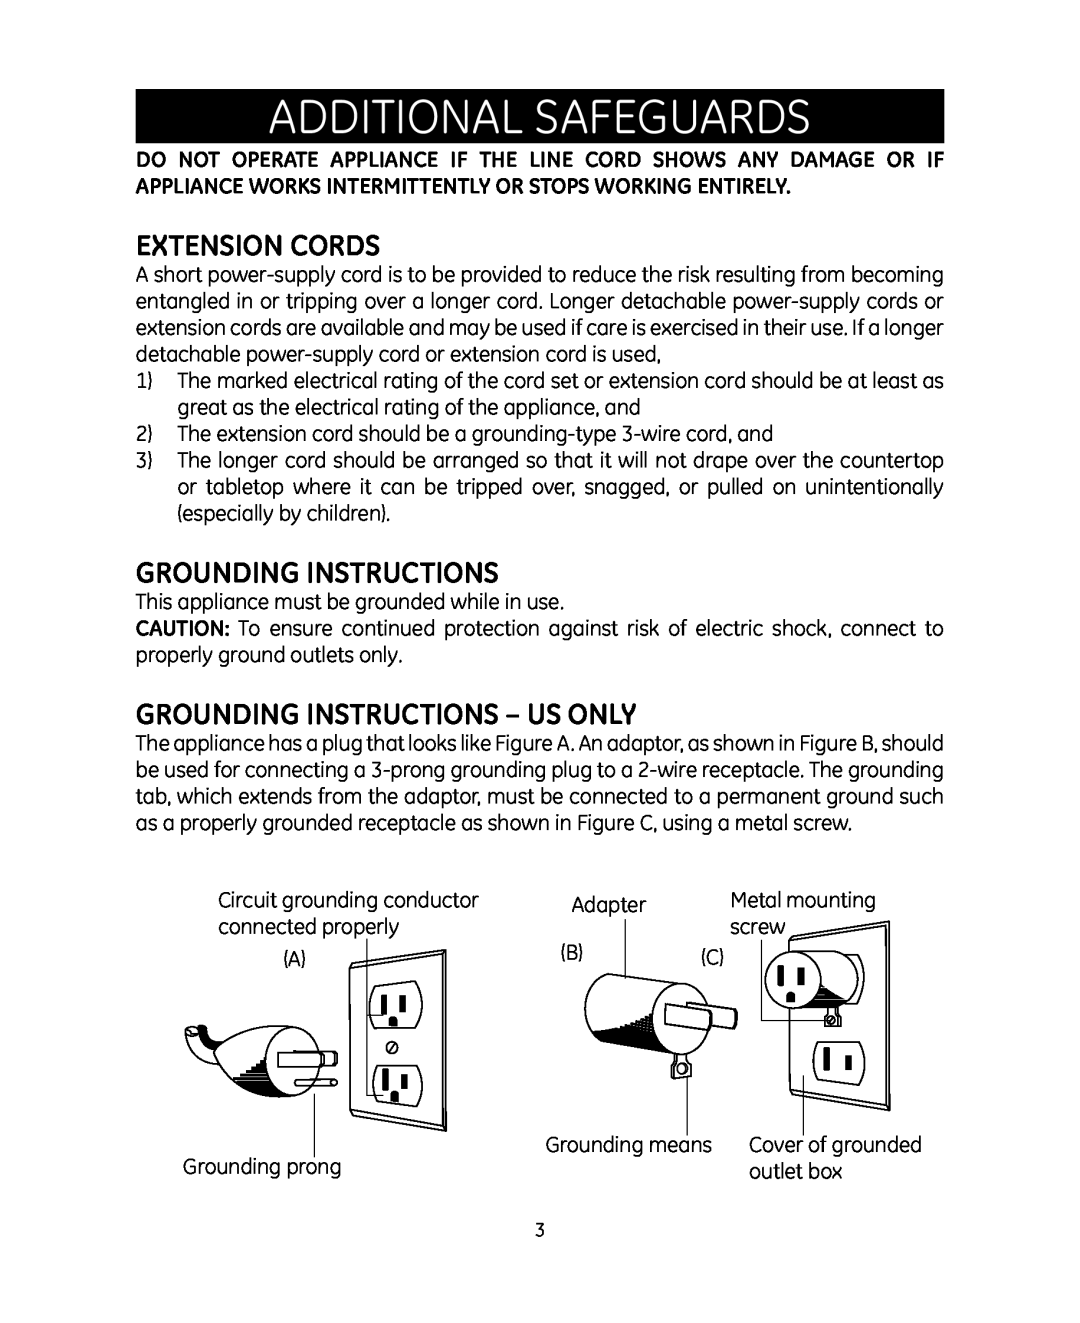 GE 681131692052 manual Additional Safeguards, Extension Cords, Grounding Instructions - Us Only 